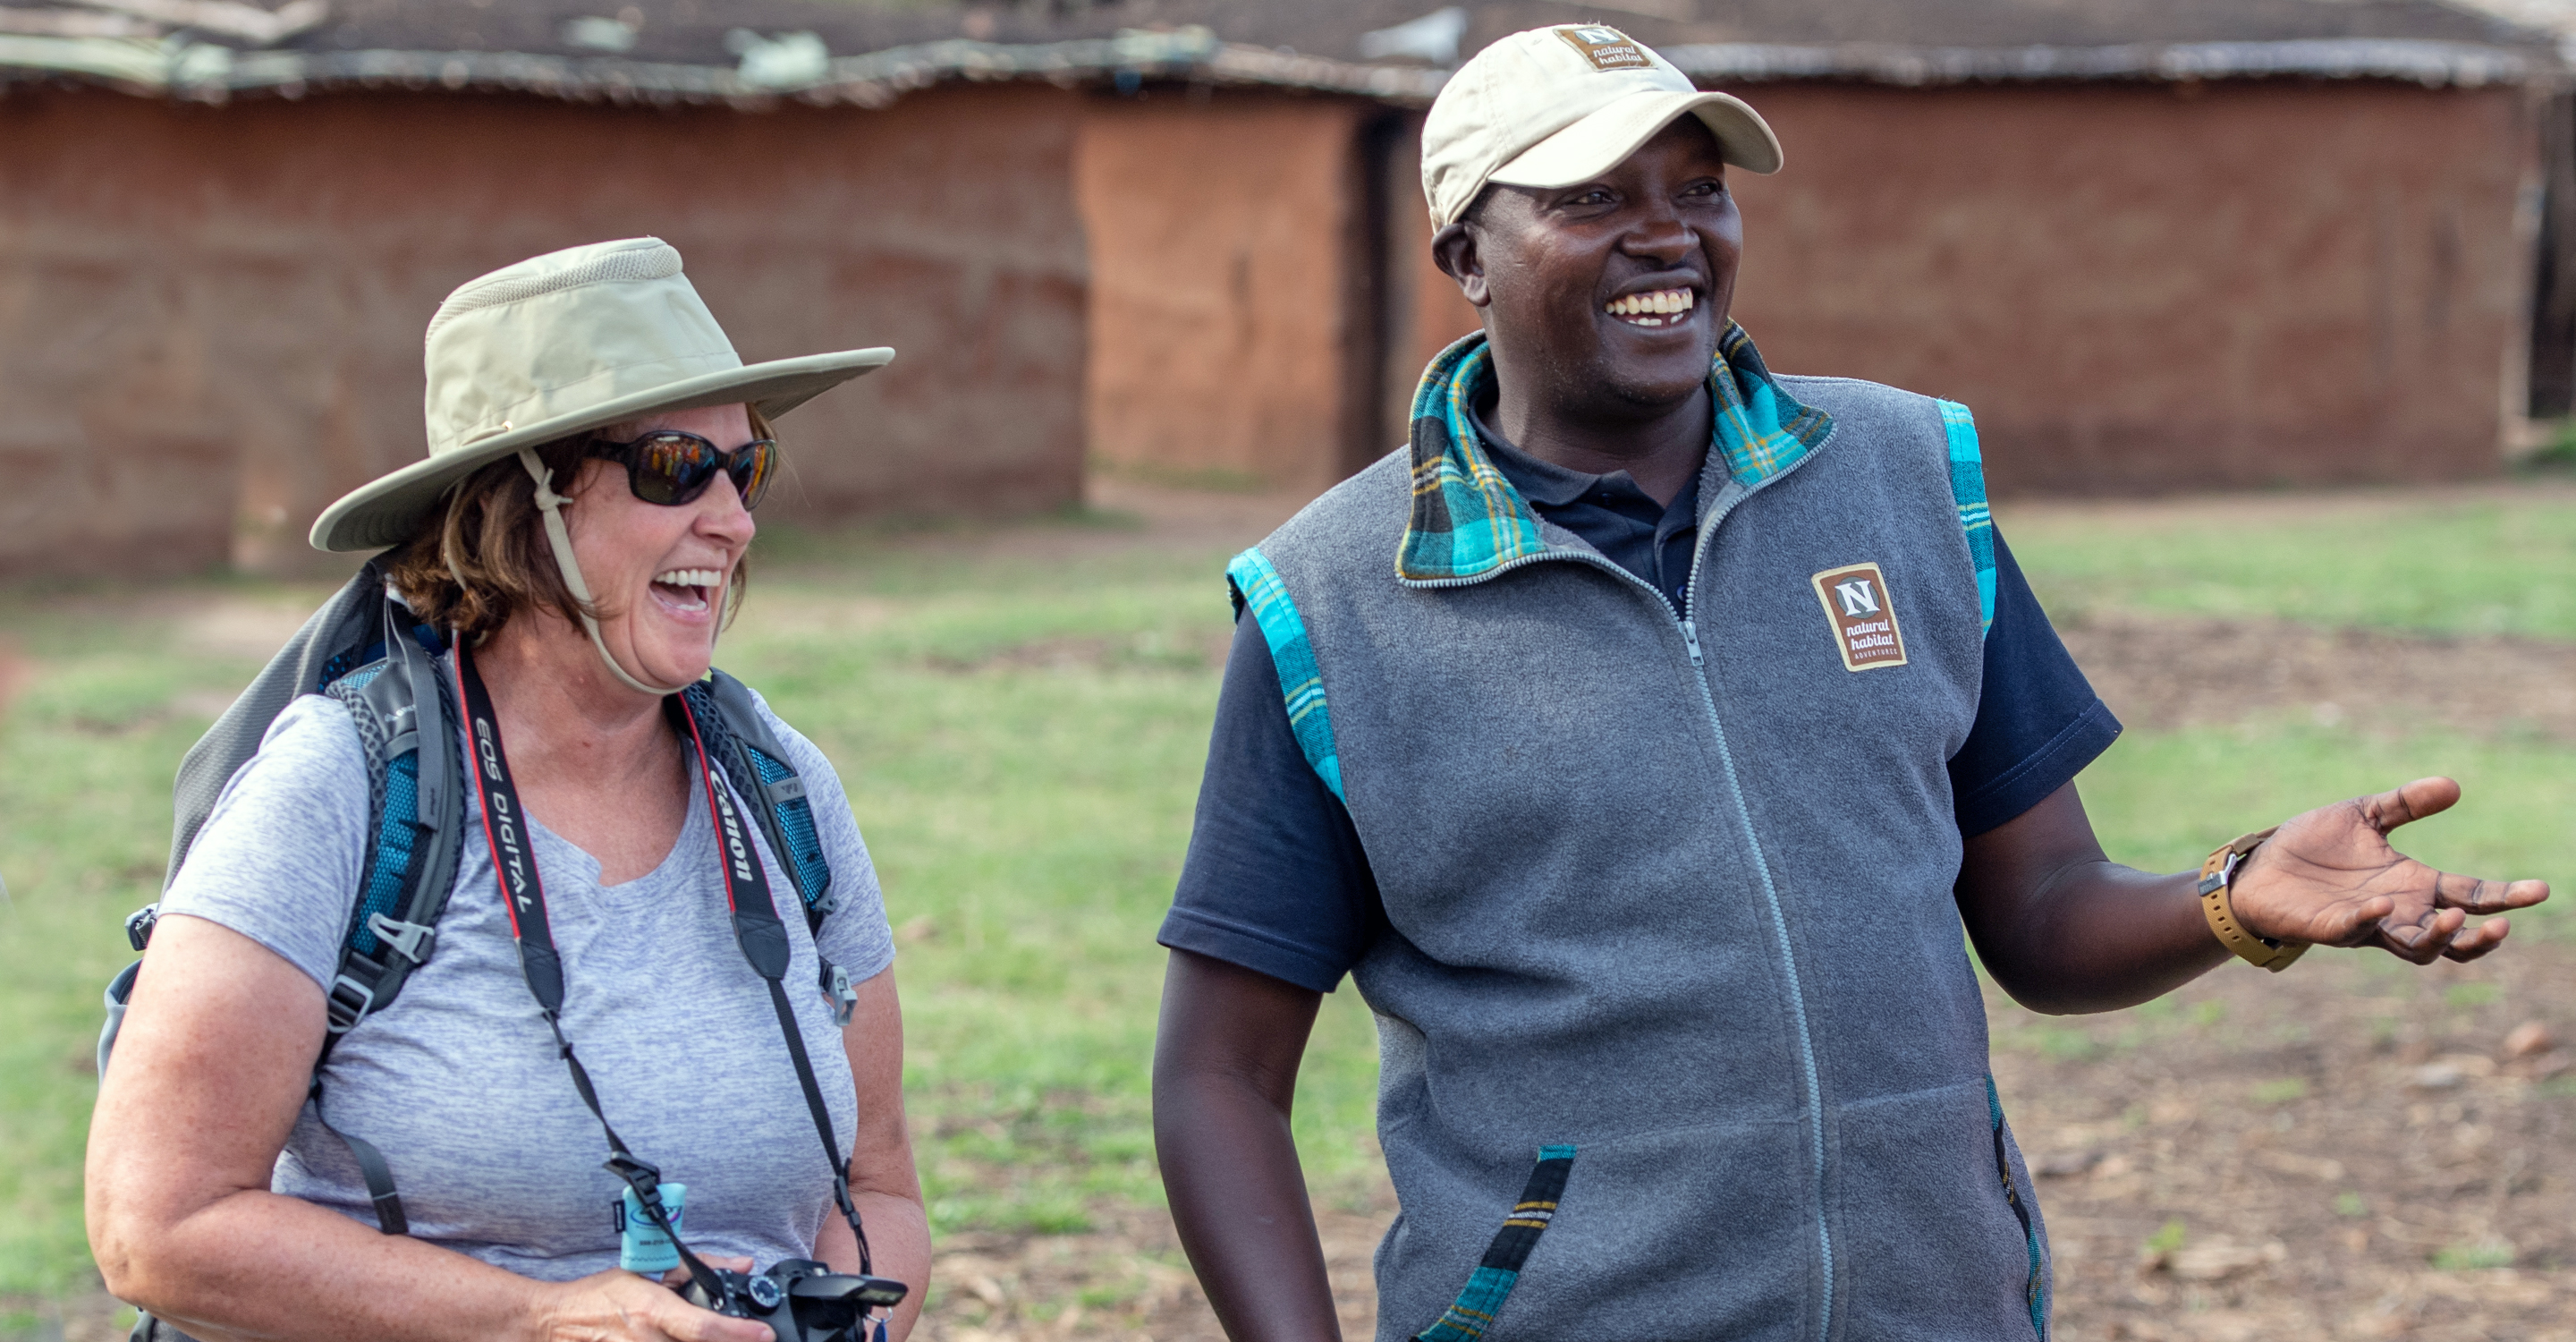 A Natural Habitat Adventures local guide and traveler share a laugh in Kenya